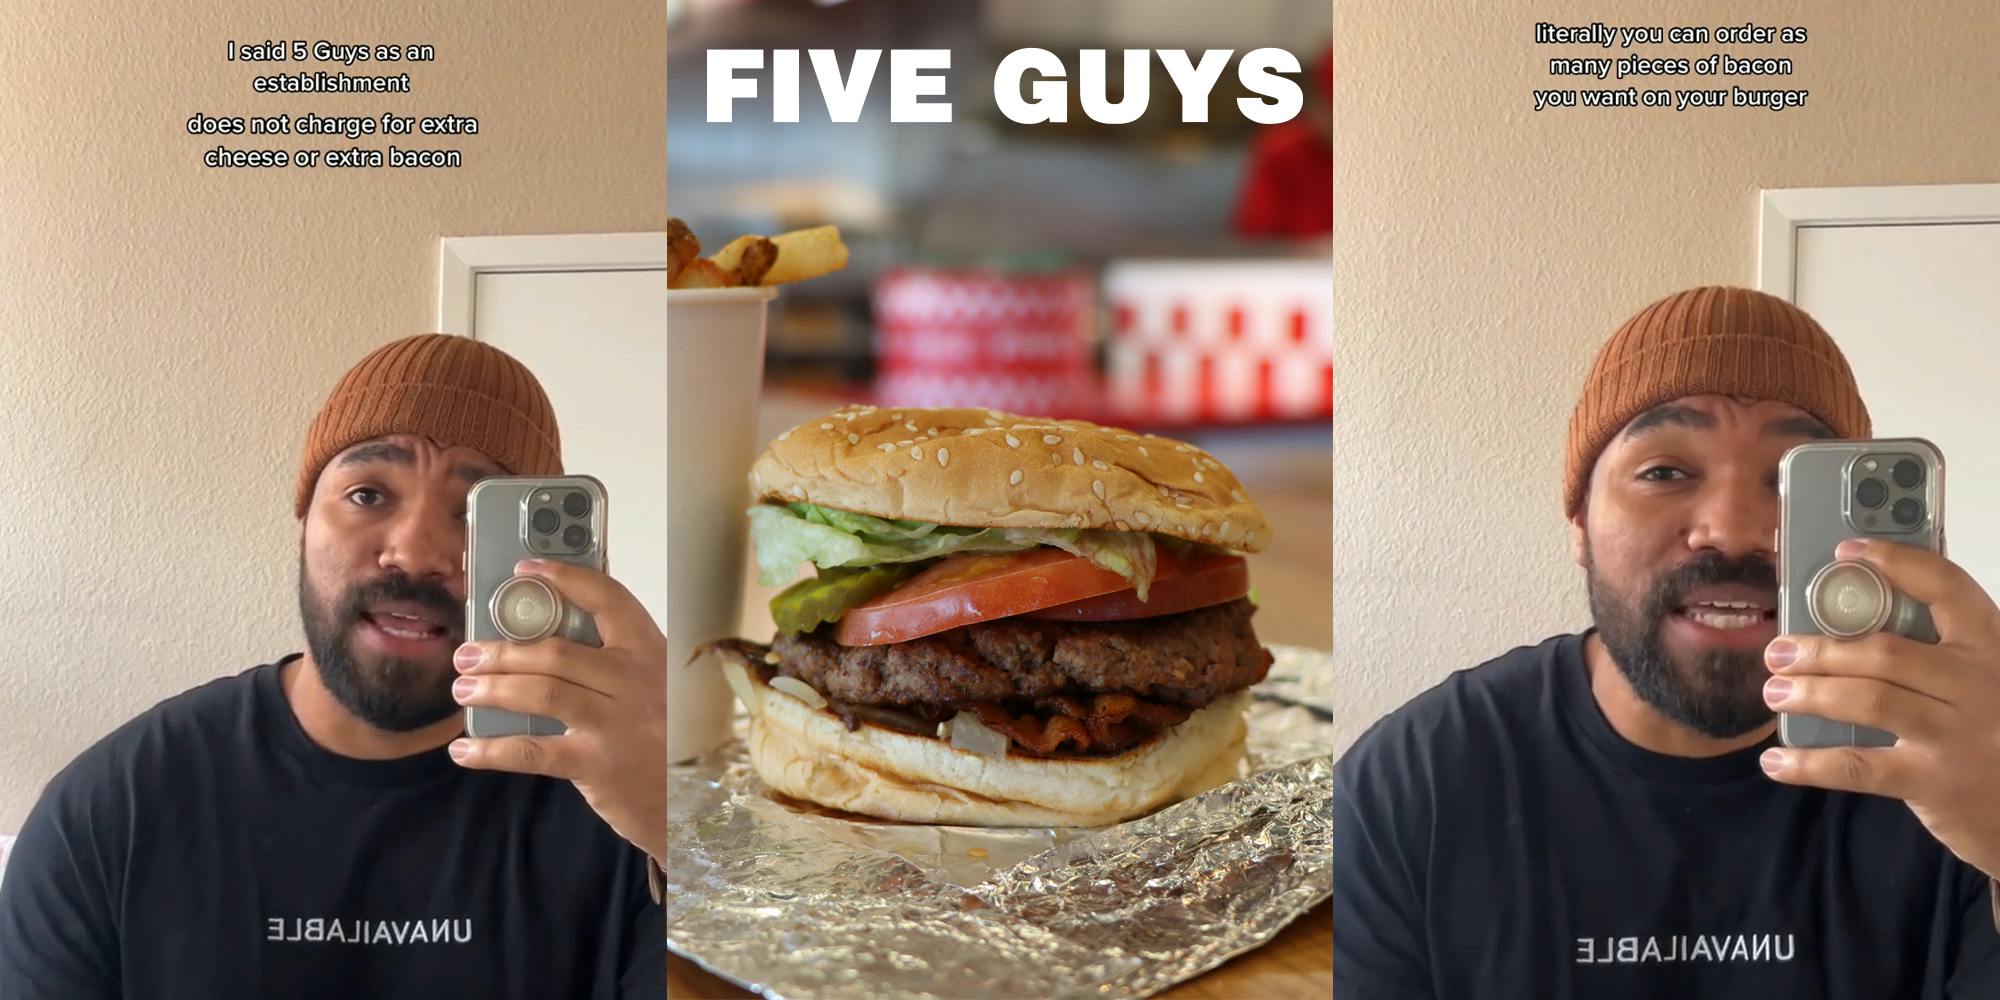 former Five Guys employee speaking with caption "I said Five Guys as an establishment does not charge for extra cheese or bacon" (l) Five Guys logo with bacon burger on table (c) former Five Guys employee speaking with caption "literally you can order as many pieces of bacon you want on your burger" (r)